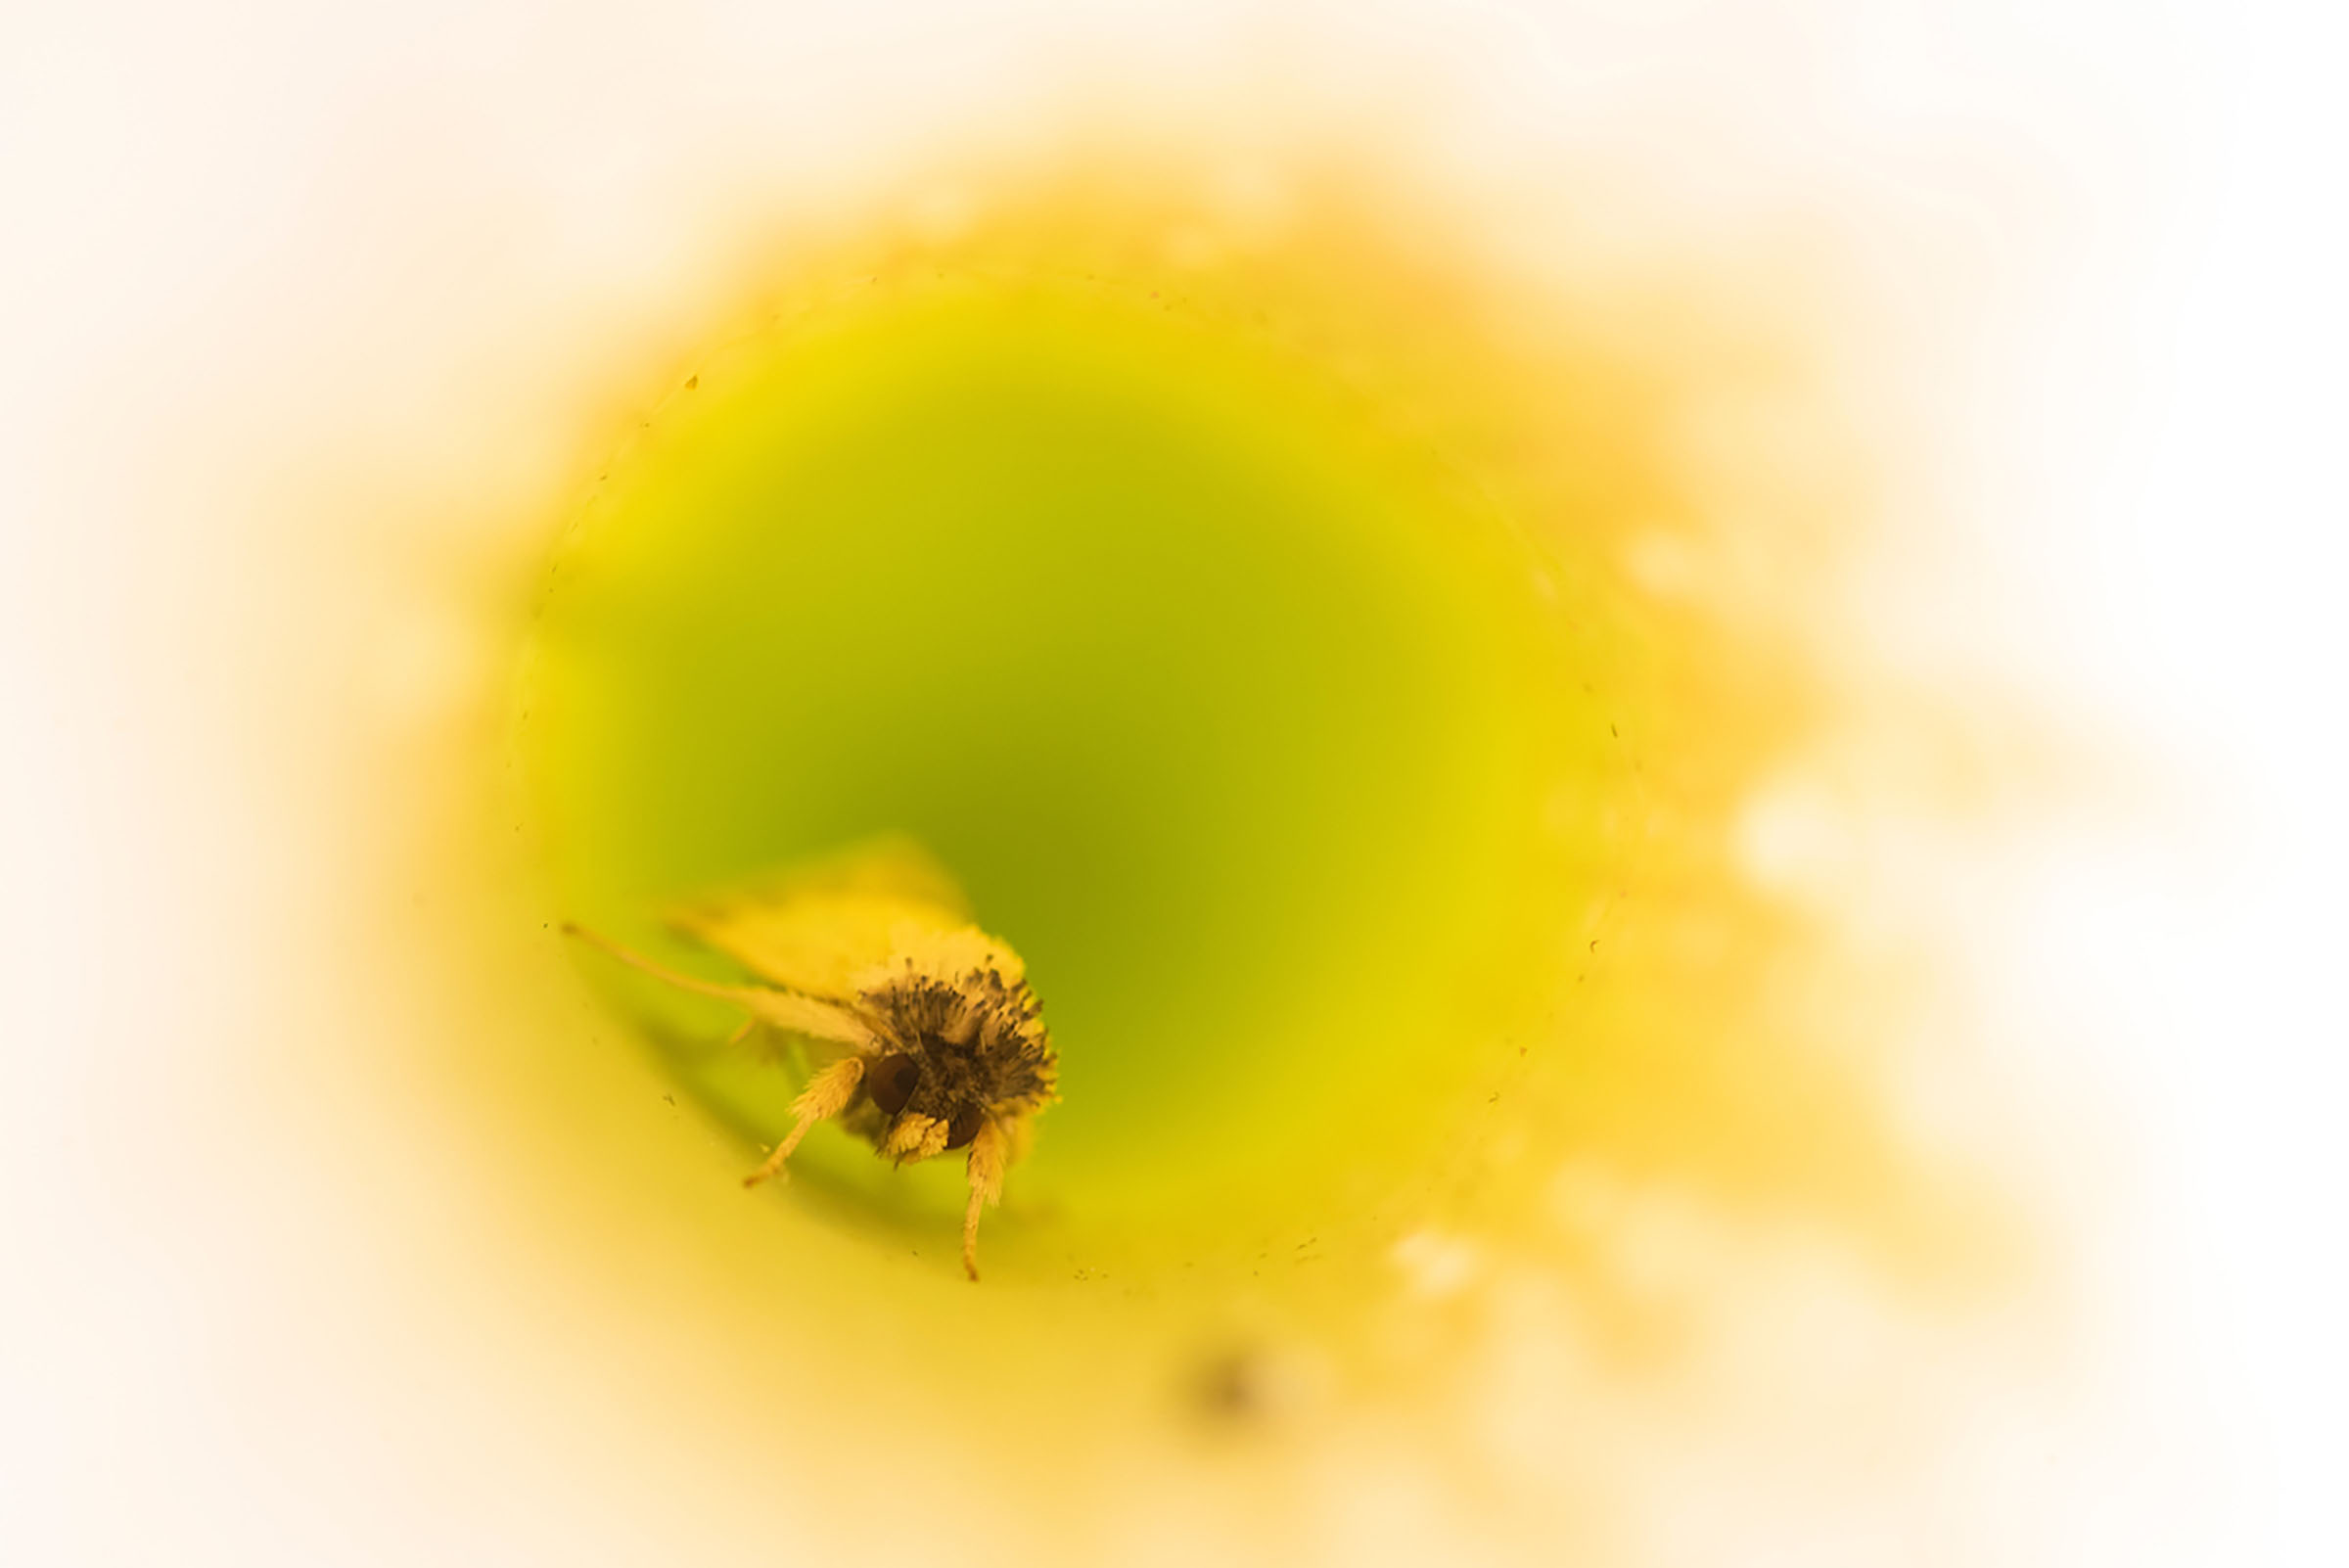 A small bug inside of a bright yellow flower